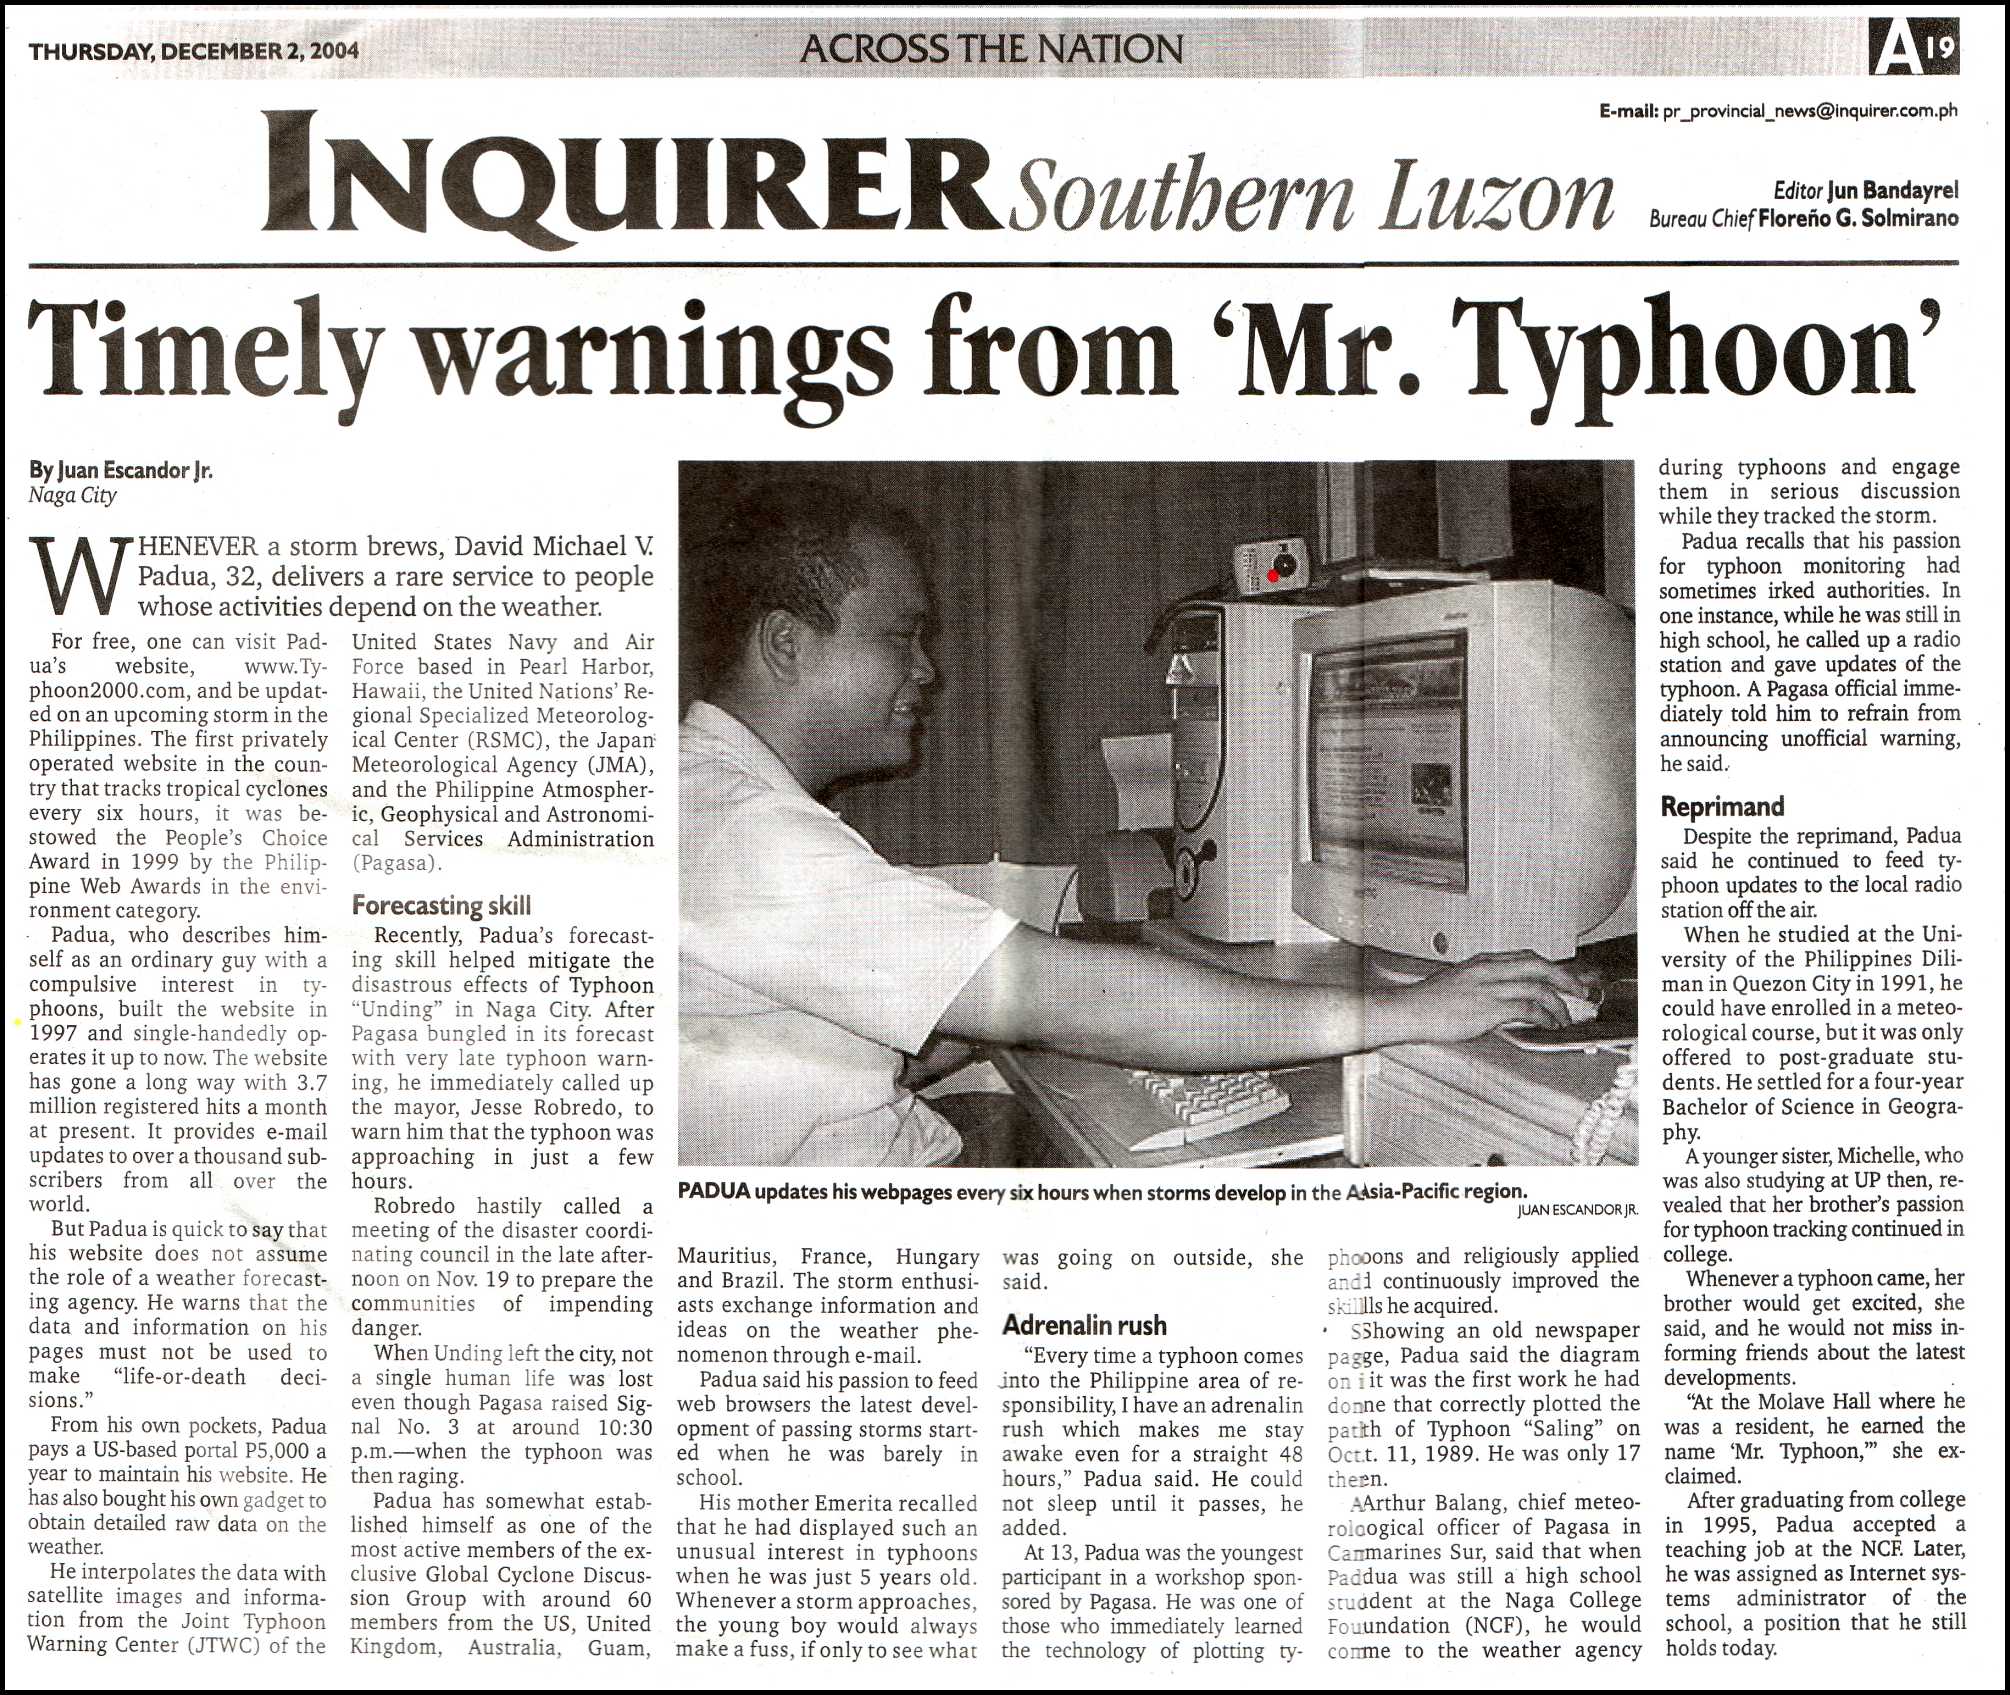 The Philippine Daily Inquirer: its a new look, new 